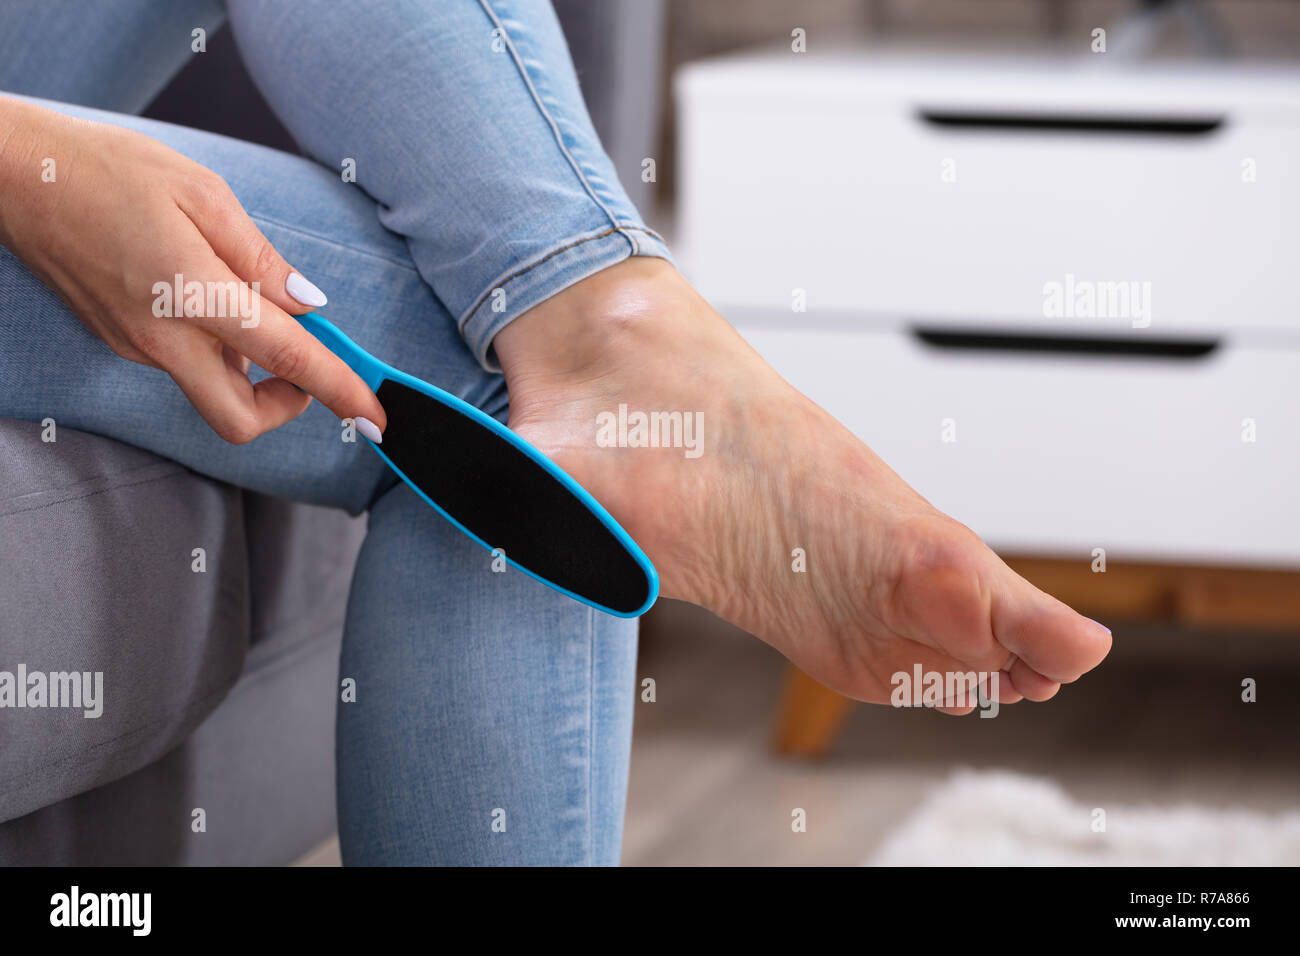 Close-up Of A Woman's Hand Filling Foot With Foot File Stock Photo